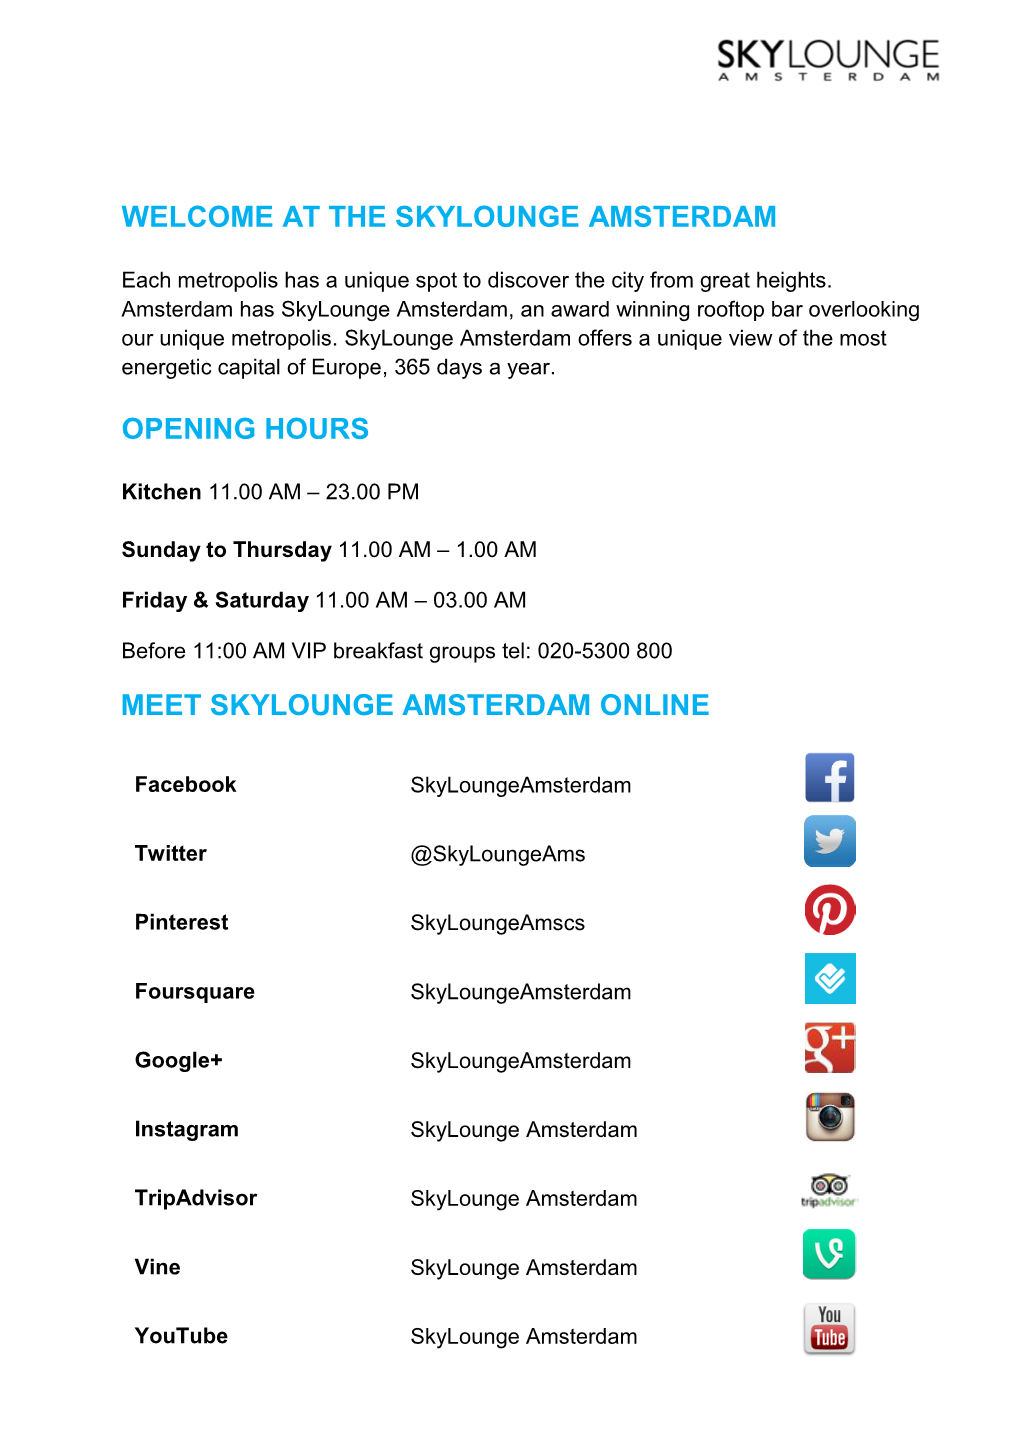 Welcome at the Skylounge Amsterdam